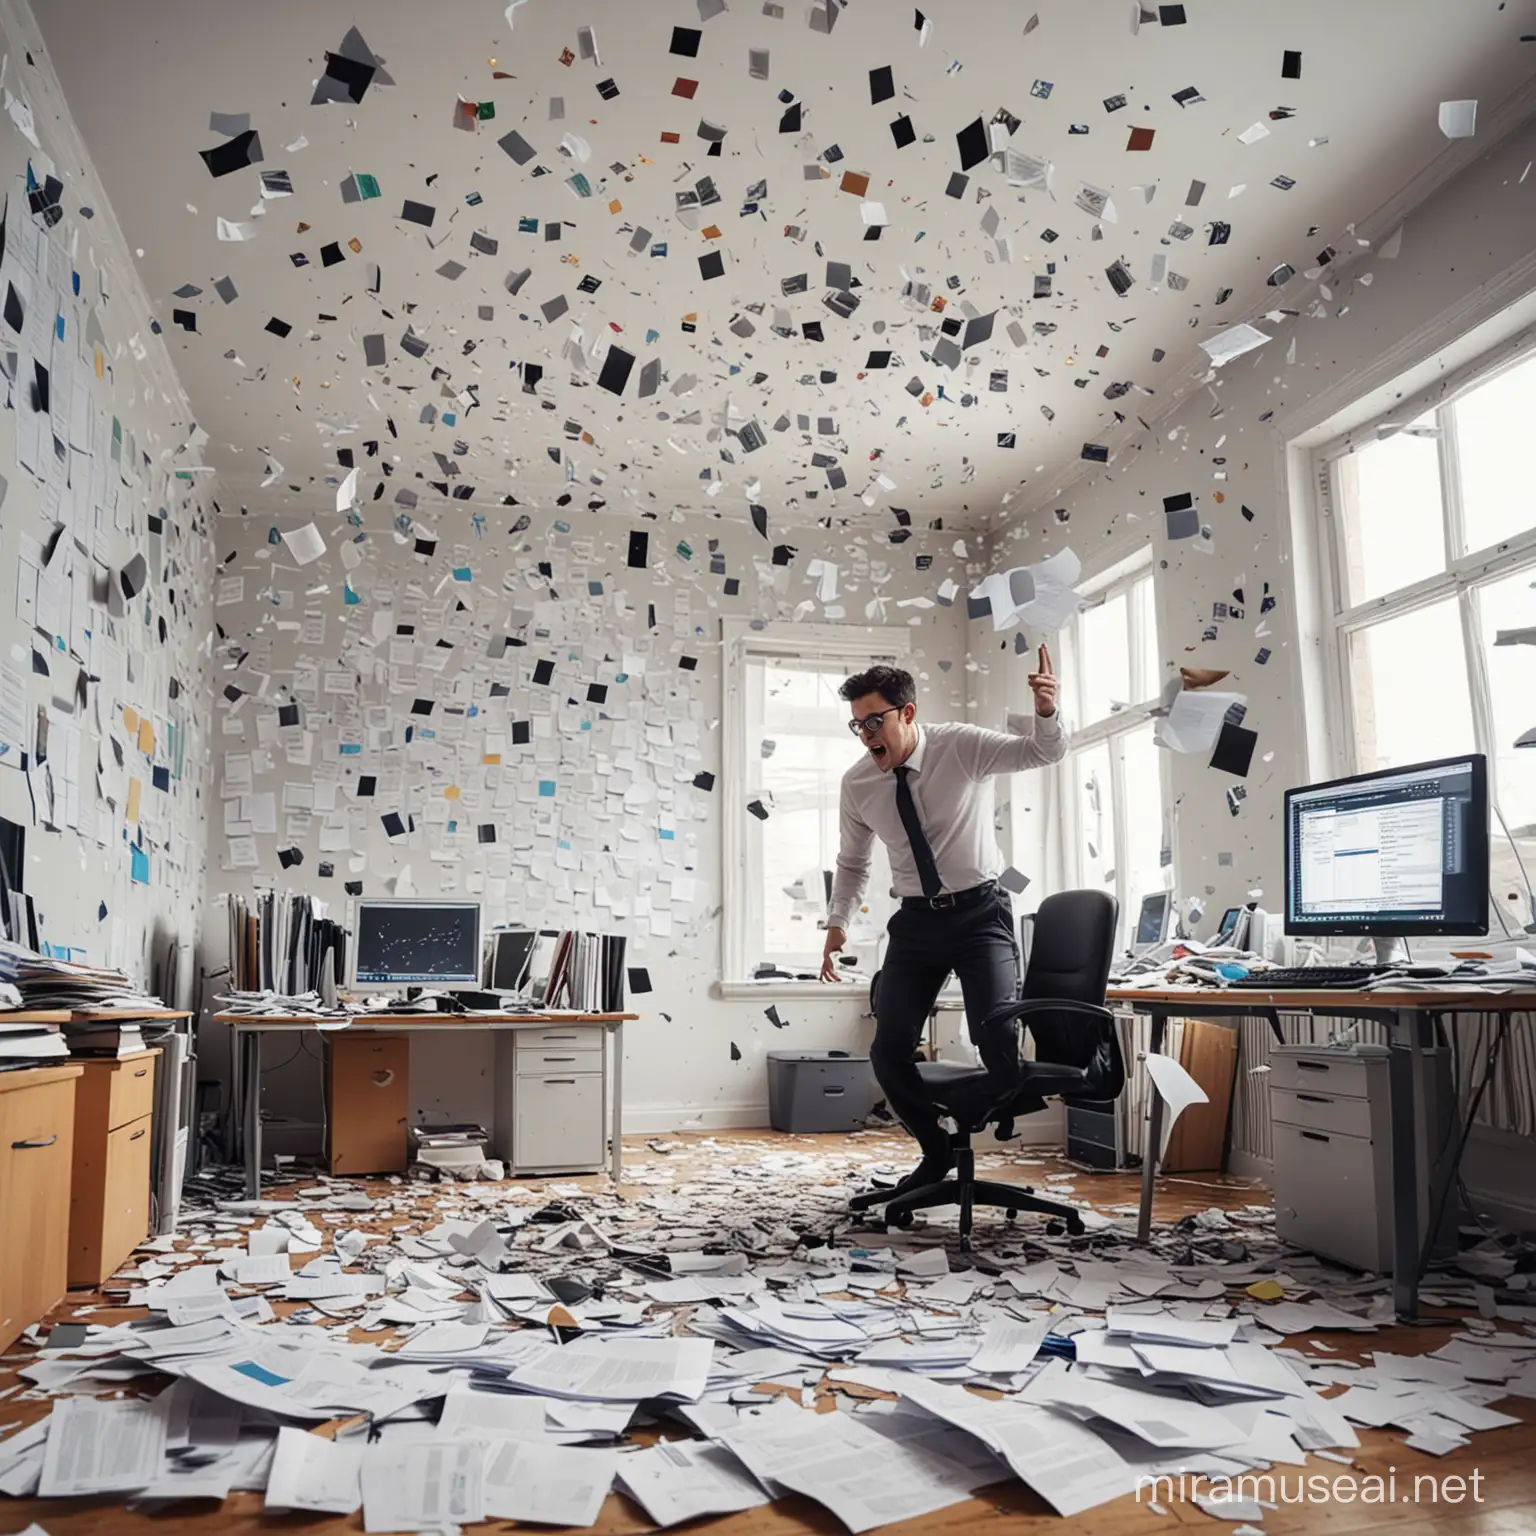 create an office worker exploring messy data. the image must show computers and documents flying over the room